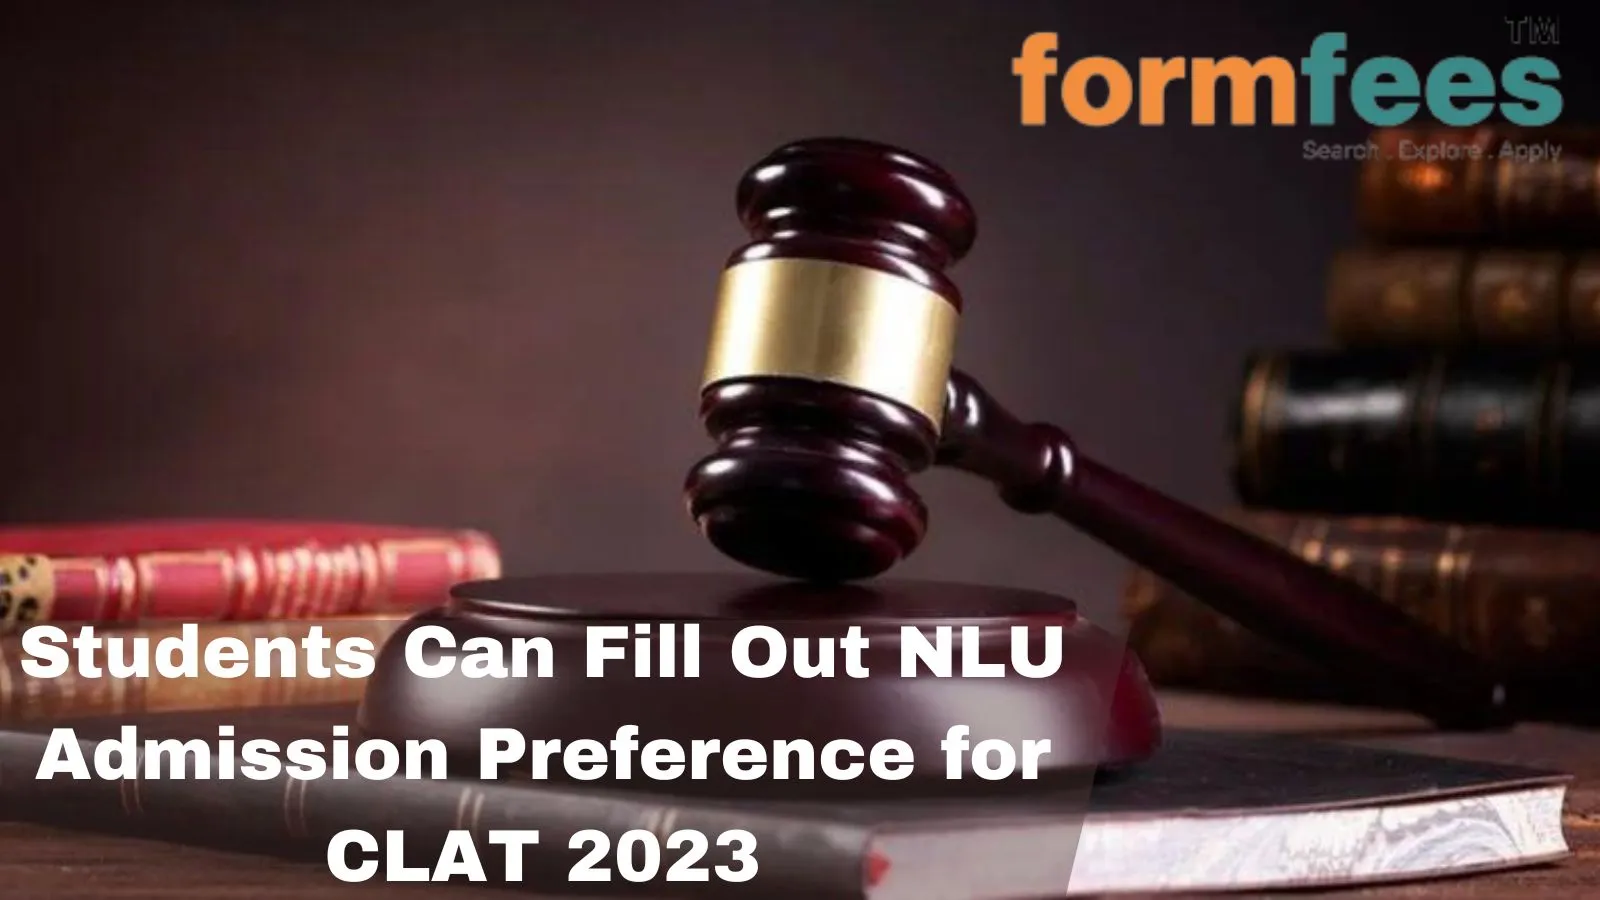 NLU Admission Preference for CLAT 2023